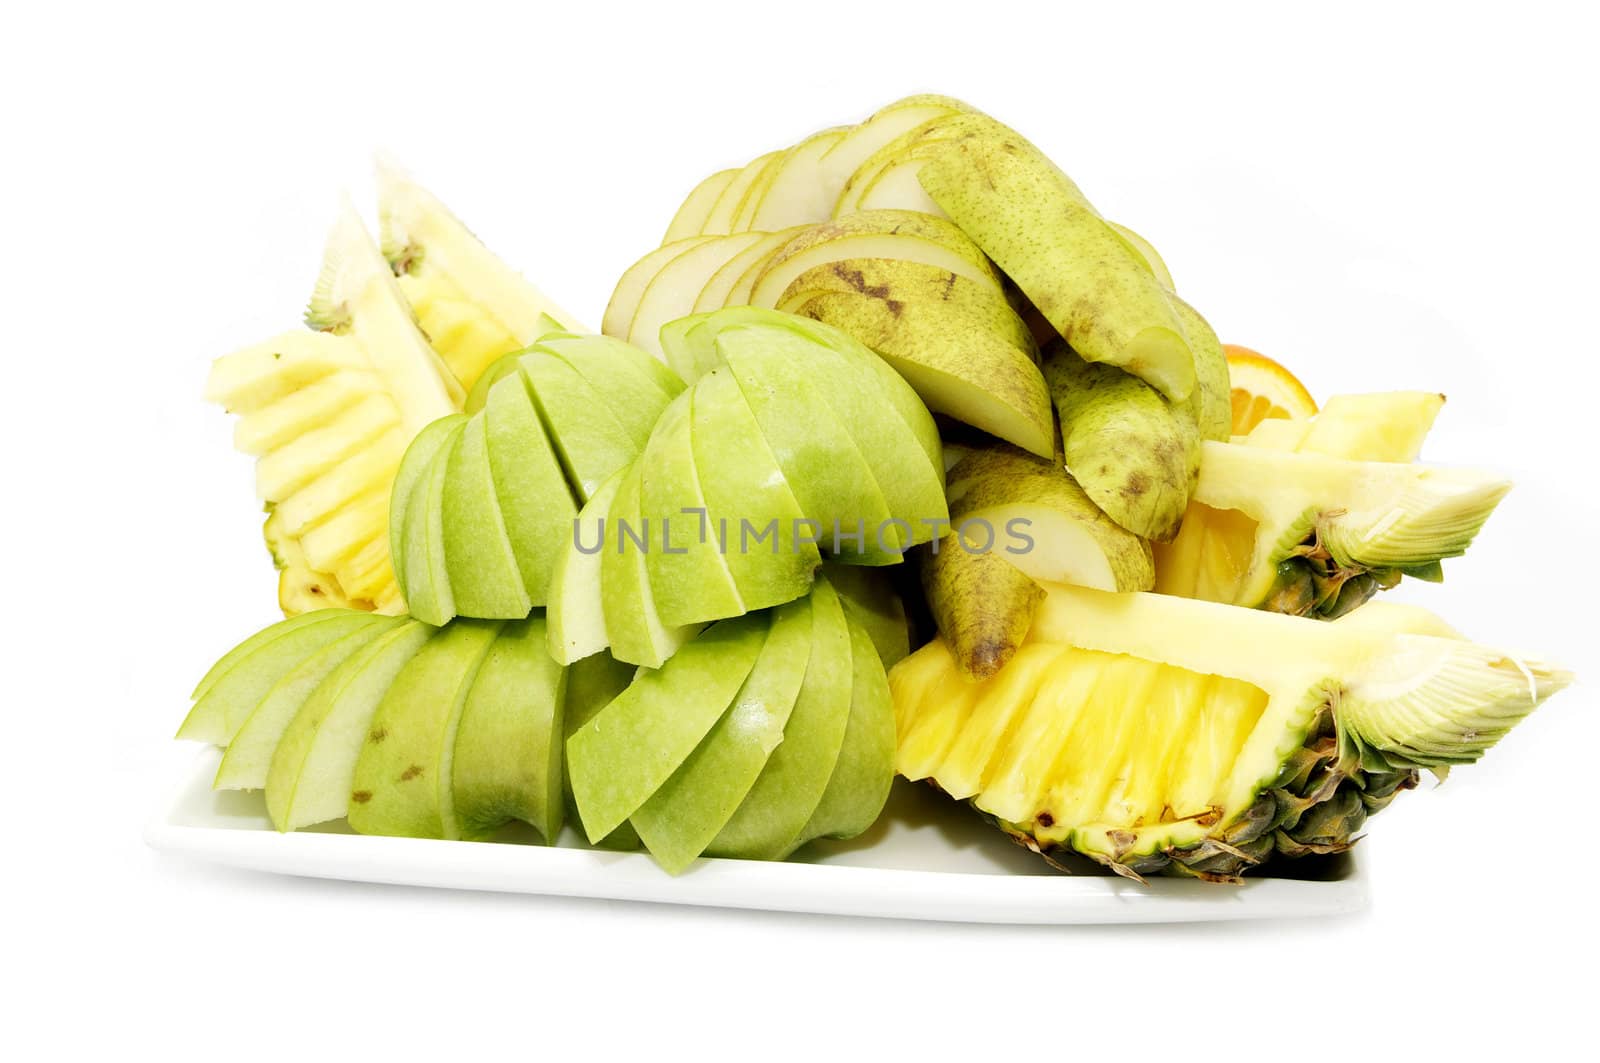 a plate of fresh juicy fruits on a white background